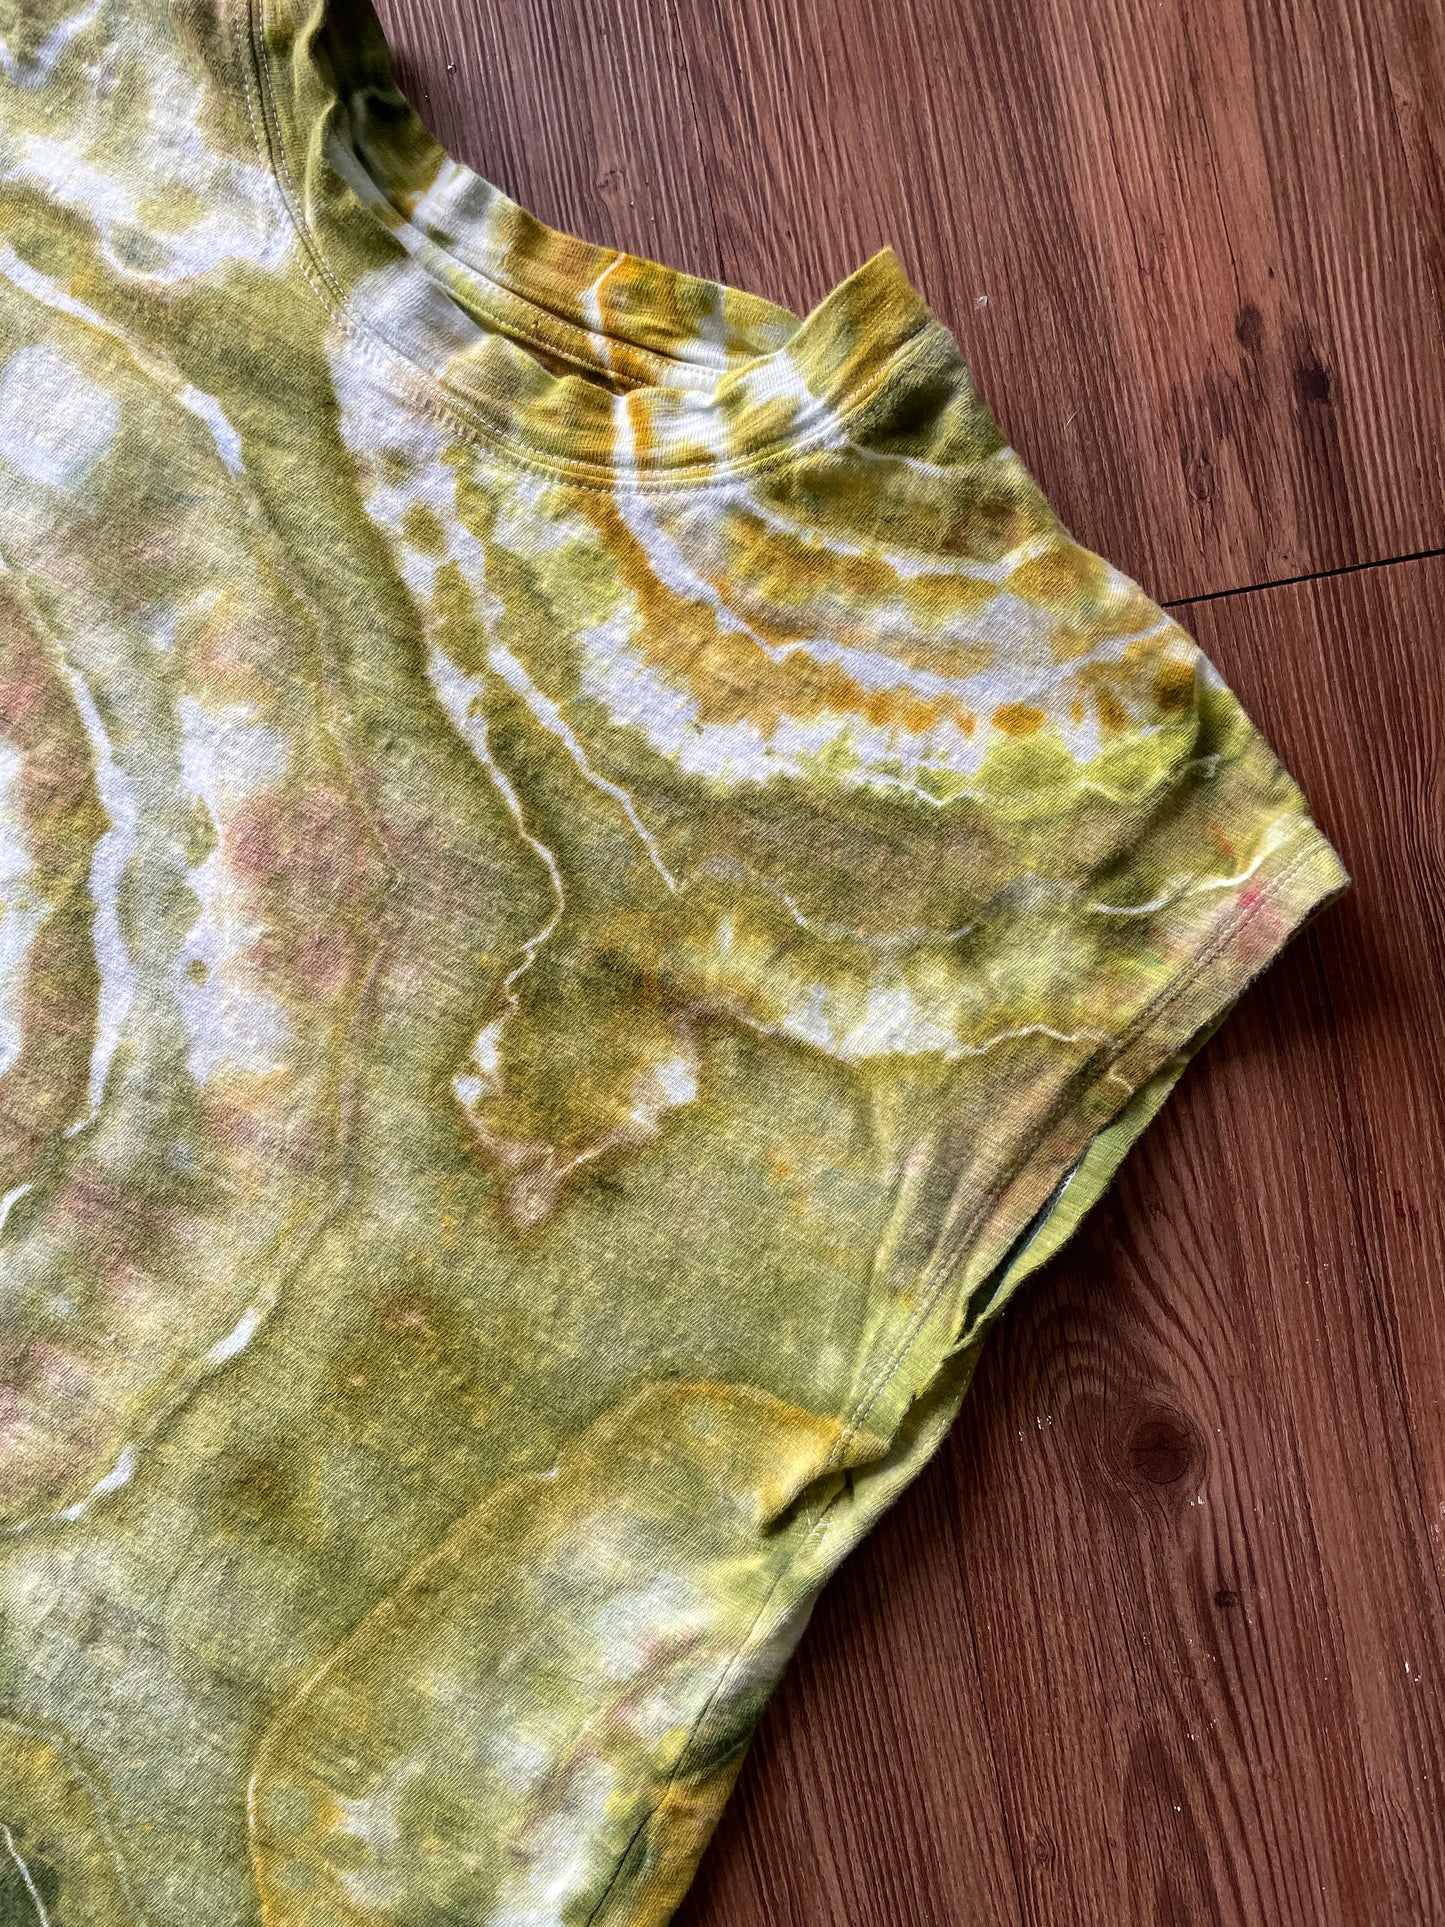 MEDIUM Women’s Earth Tones Geode Handmade Tie Dye Muscle Tee | One-Of-a-Kind Green and Yellow Short Sleeve T-Shirt